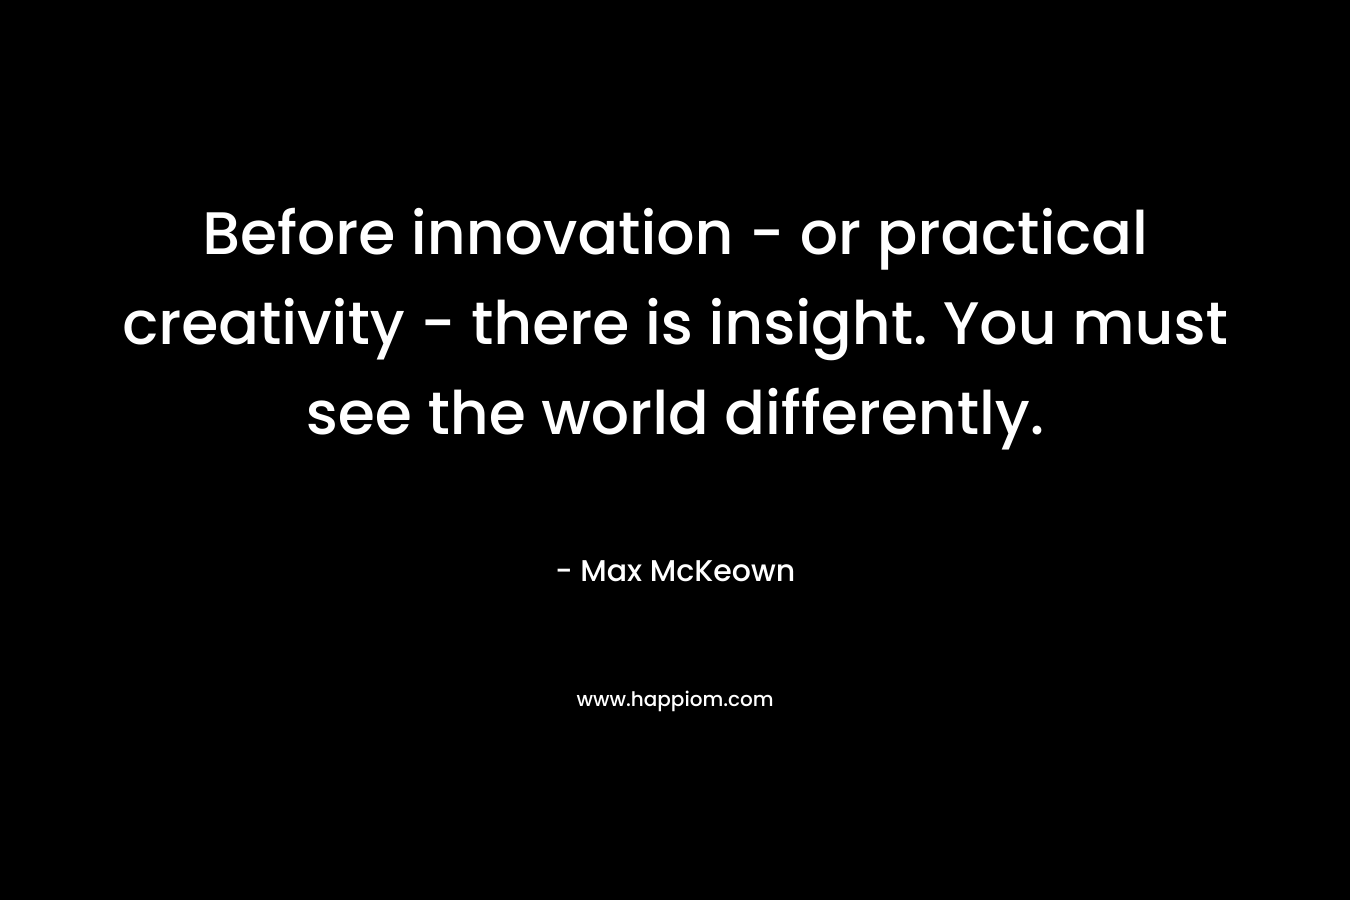 Before innovation - or practical creativity - there is insight. You must see the world differently.